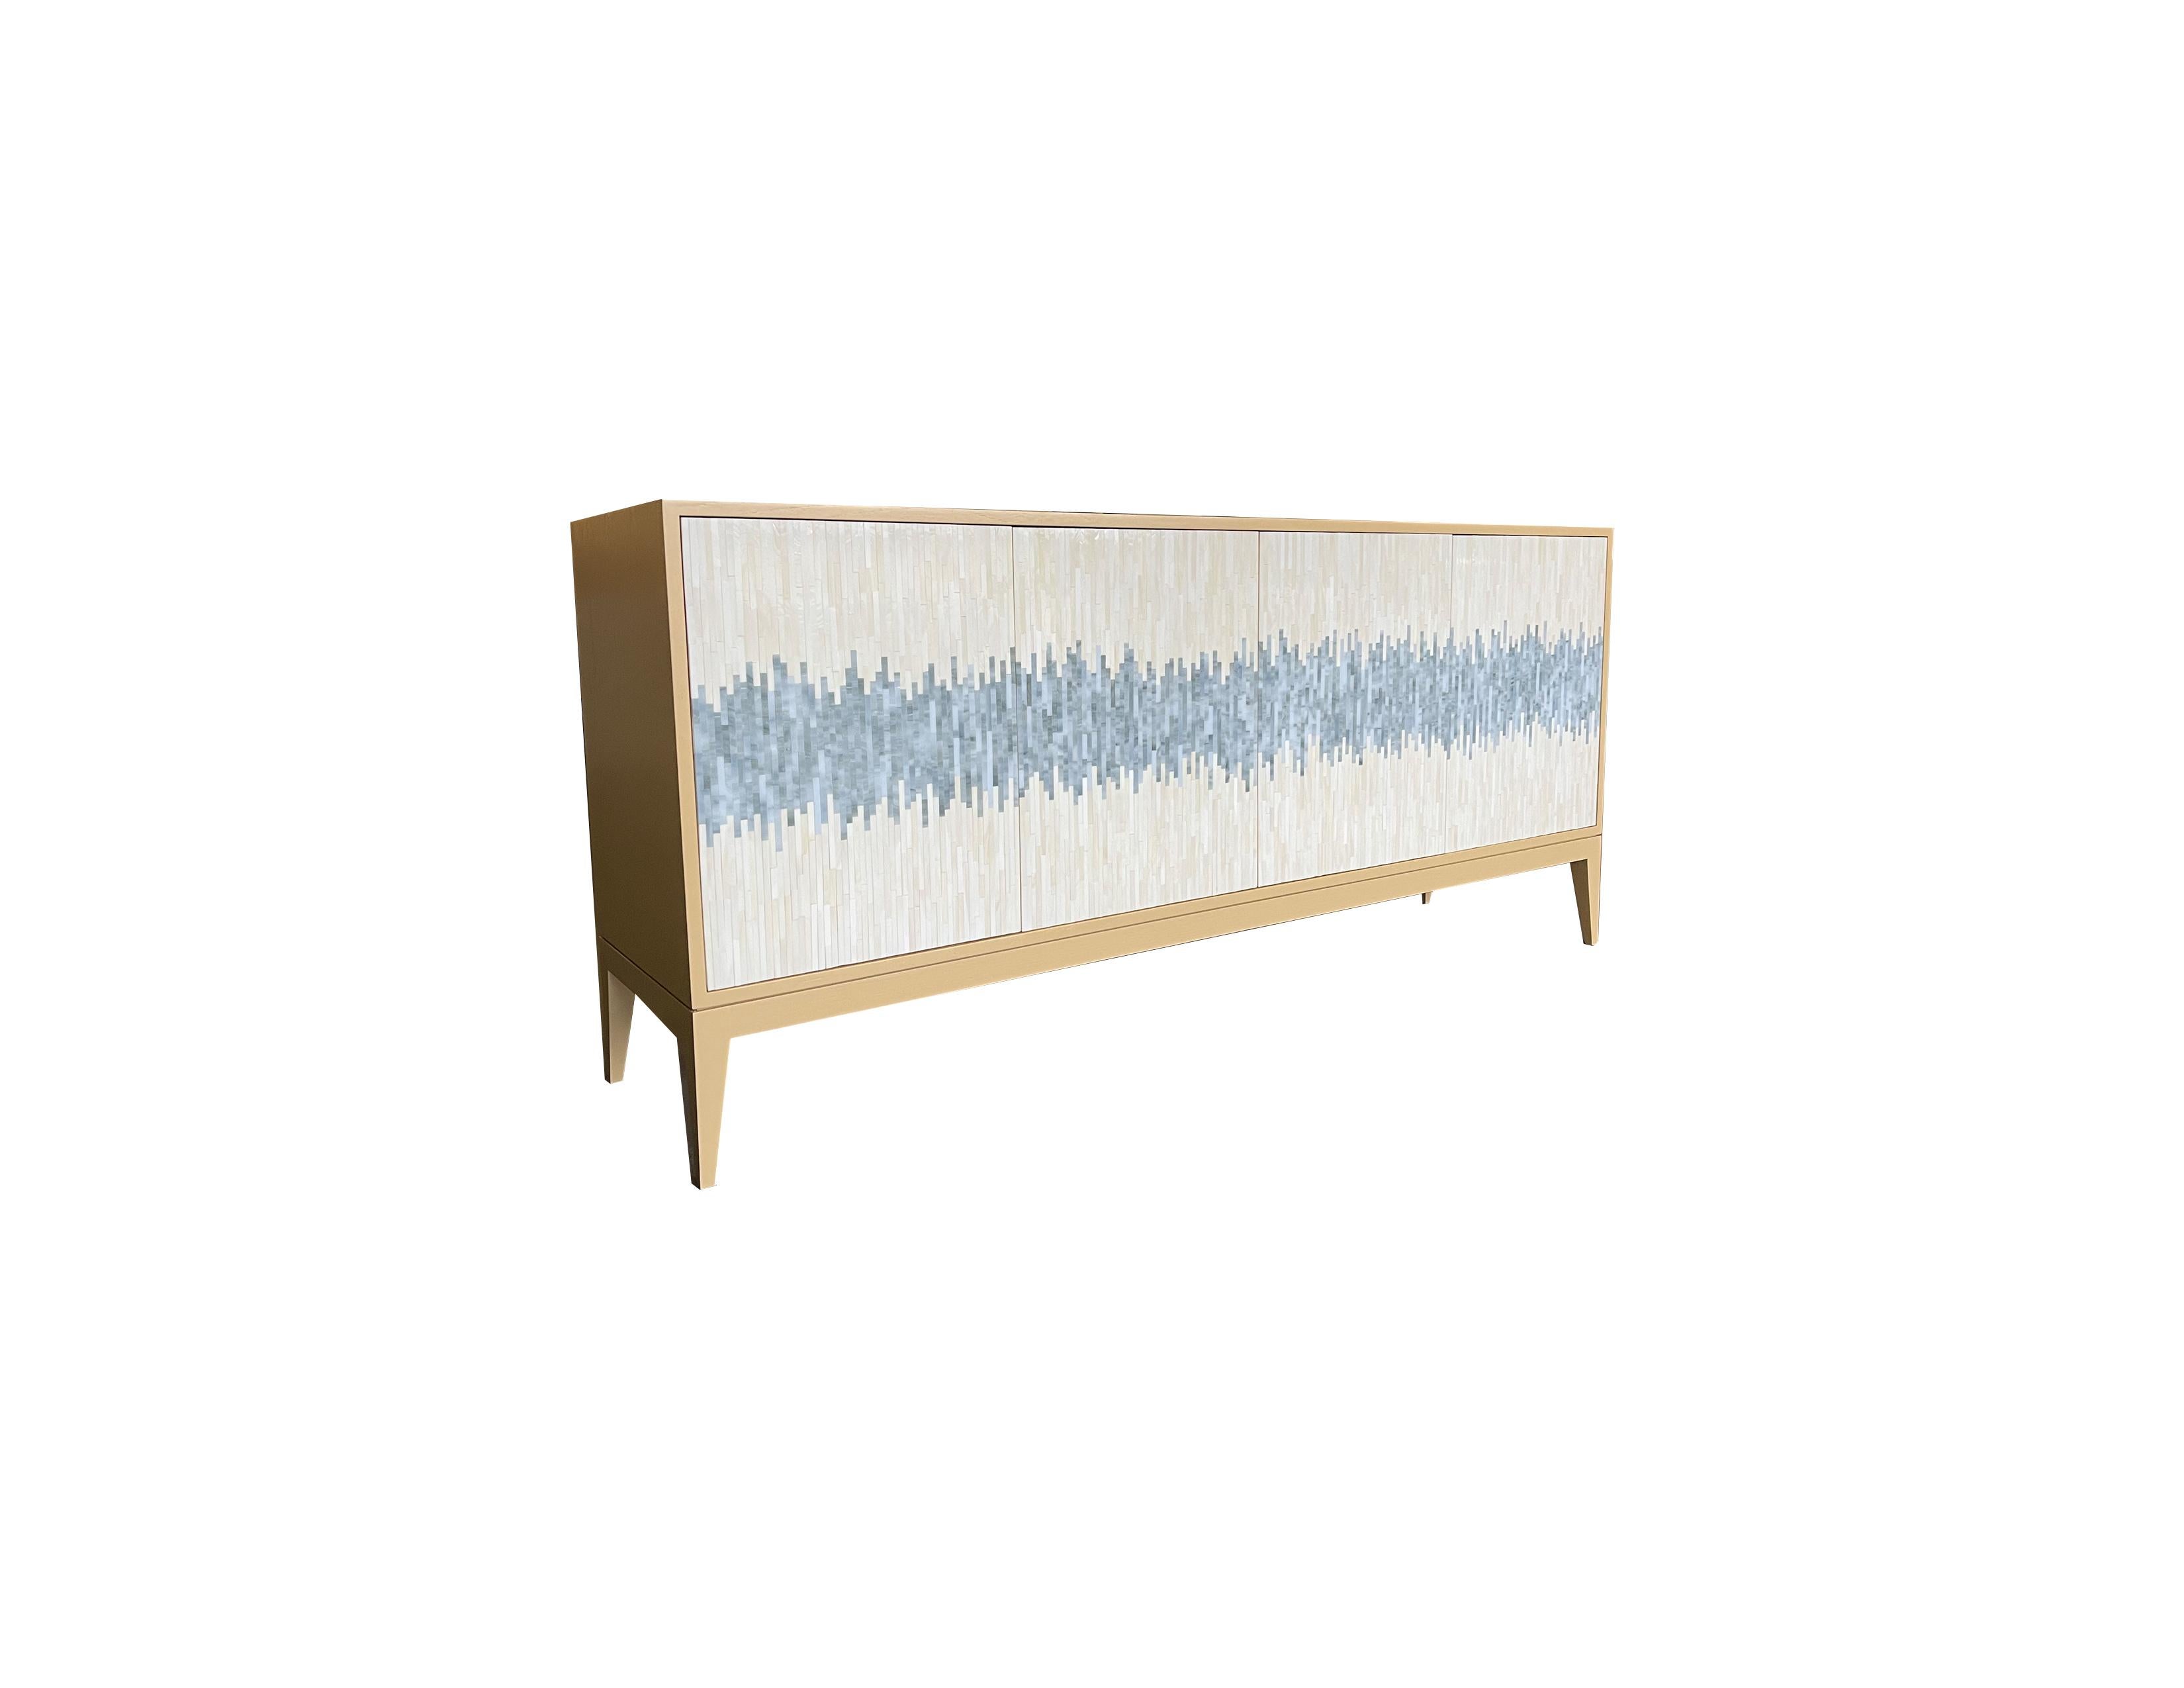 Our custom Milano 4 door wave buffet is a beautiful piece consisting of two compartments, 4 touch latch doors, and a Ercole Milano Wood Base. This Piece is finished in a custom Benjamin Moore paint that is a warm tan color. The glass wave pattern is